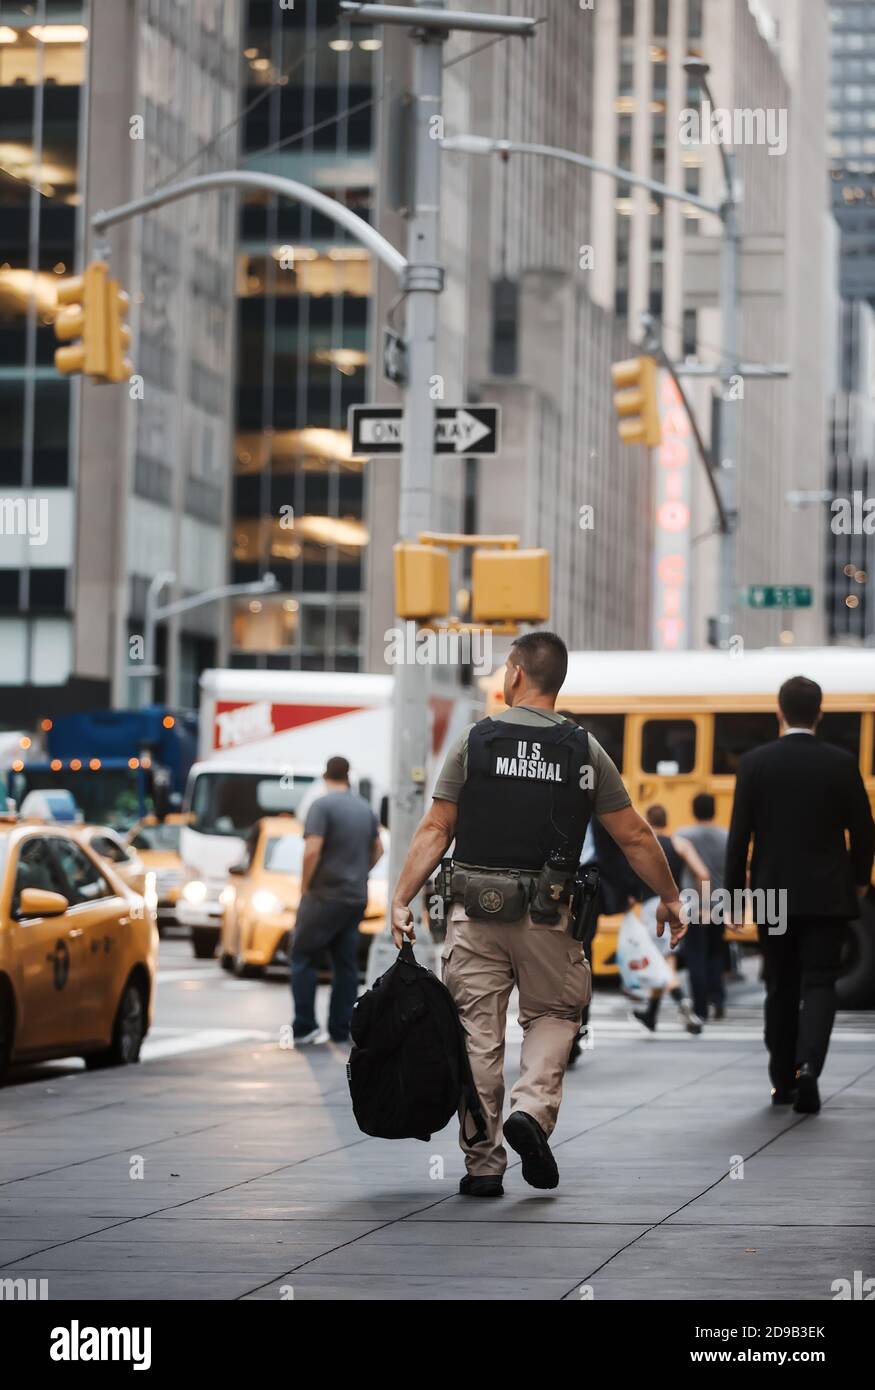 NEW YORK, USA - Sep 21, 2016: Manhattan street scene. US Marshal in the streets of New York City in the evening time Stock Photo